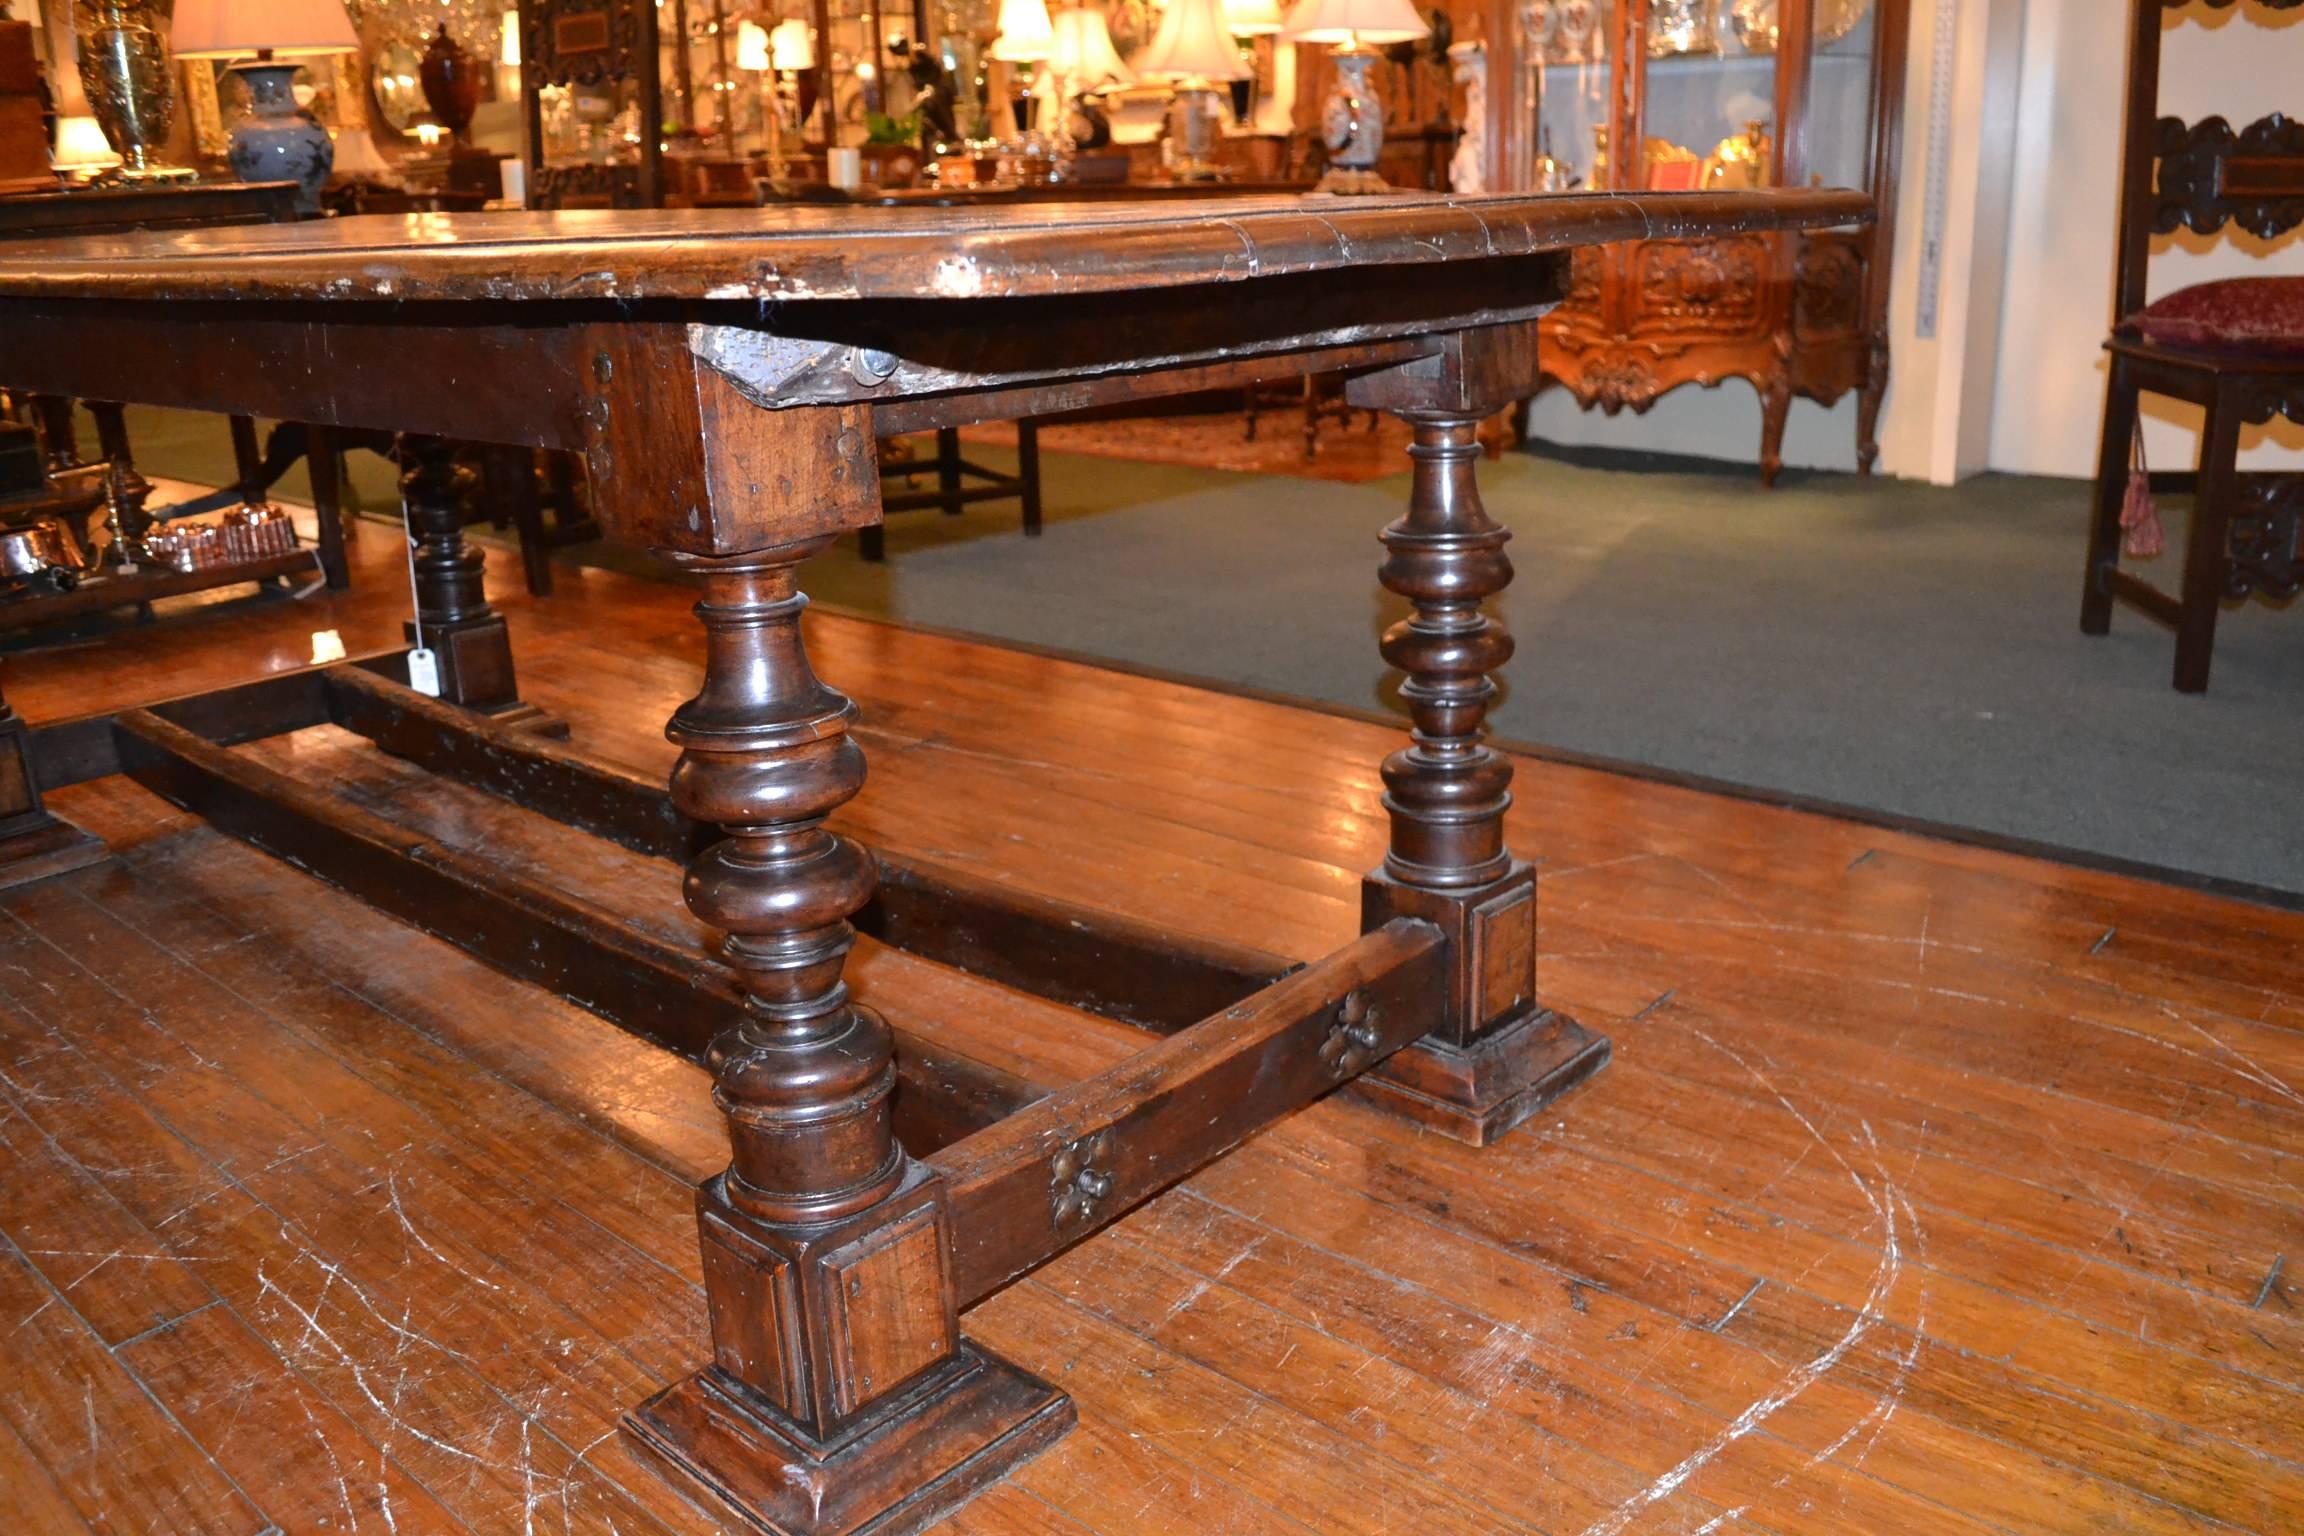 This is a wonderfully sturdy oak dining table.